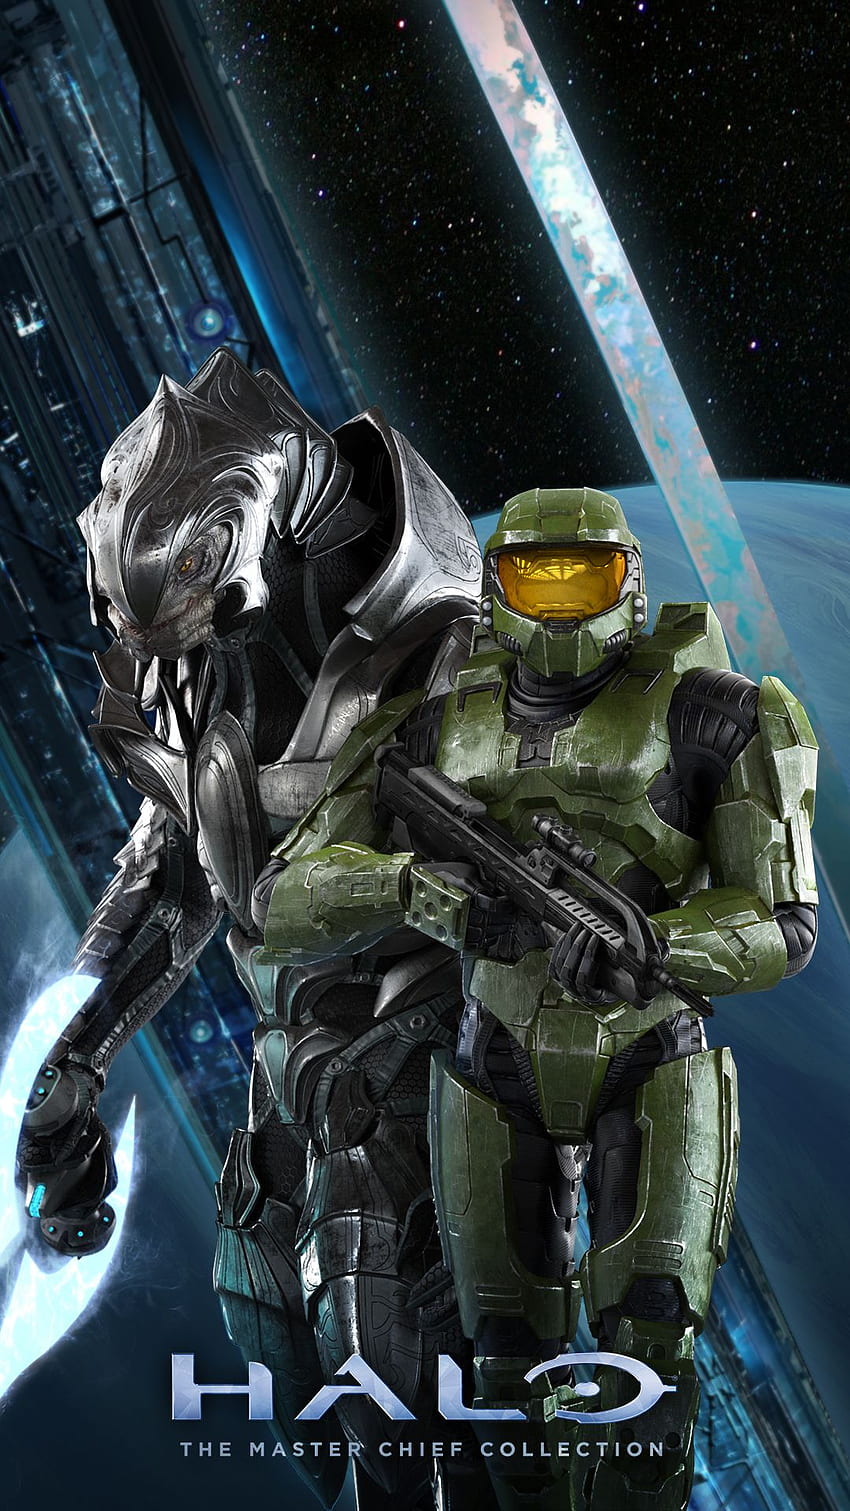 3840x2160px, 4K Free download | Halo 2 Master Chief And Arbiter HD ...